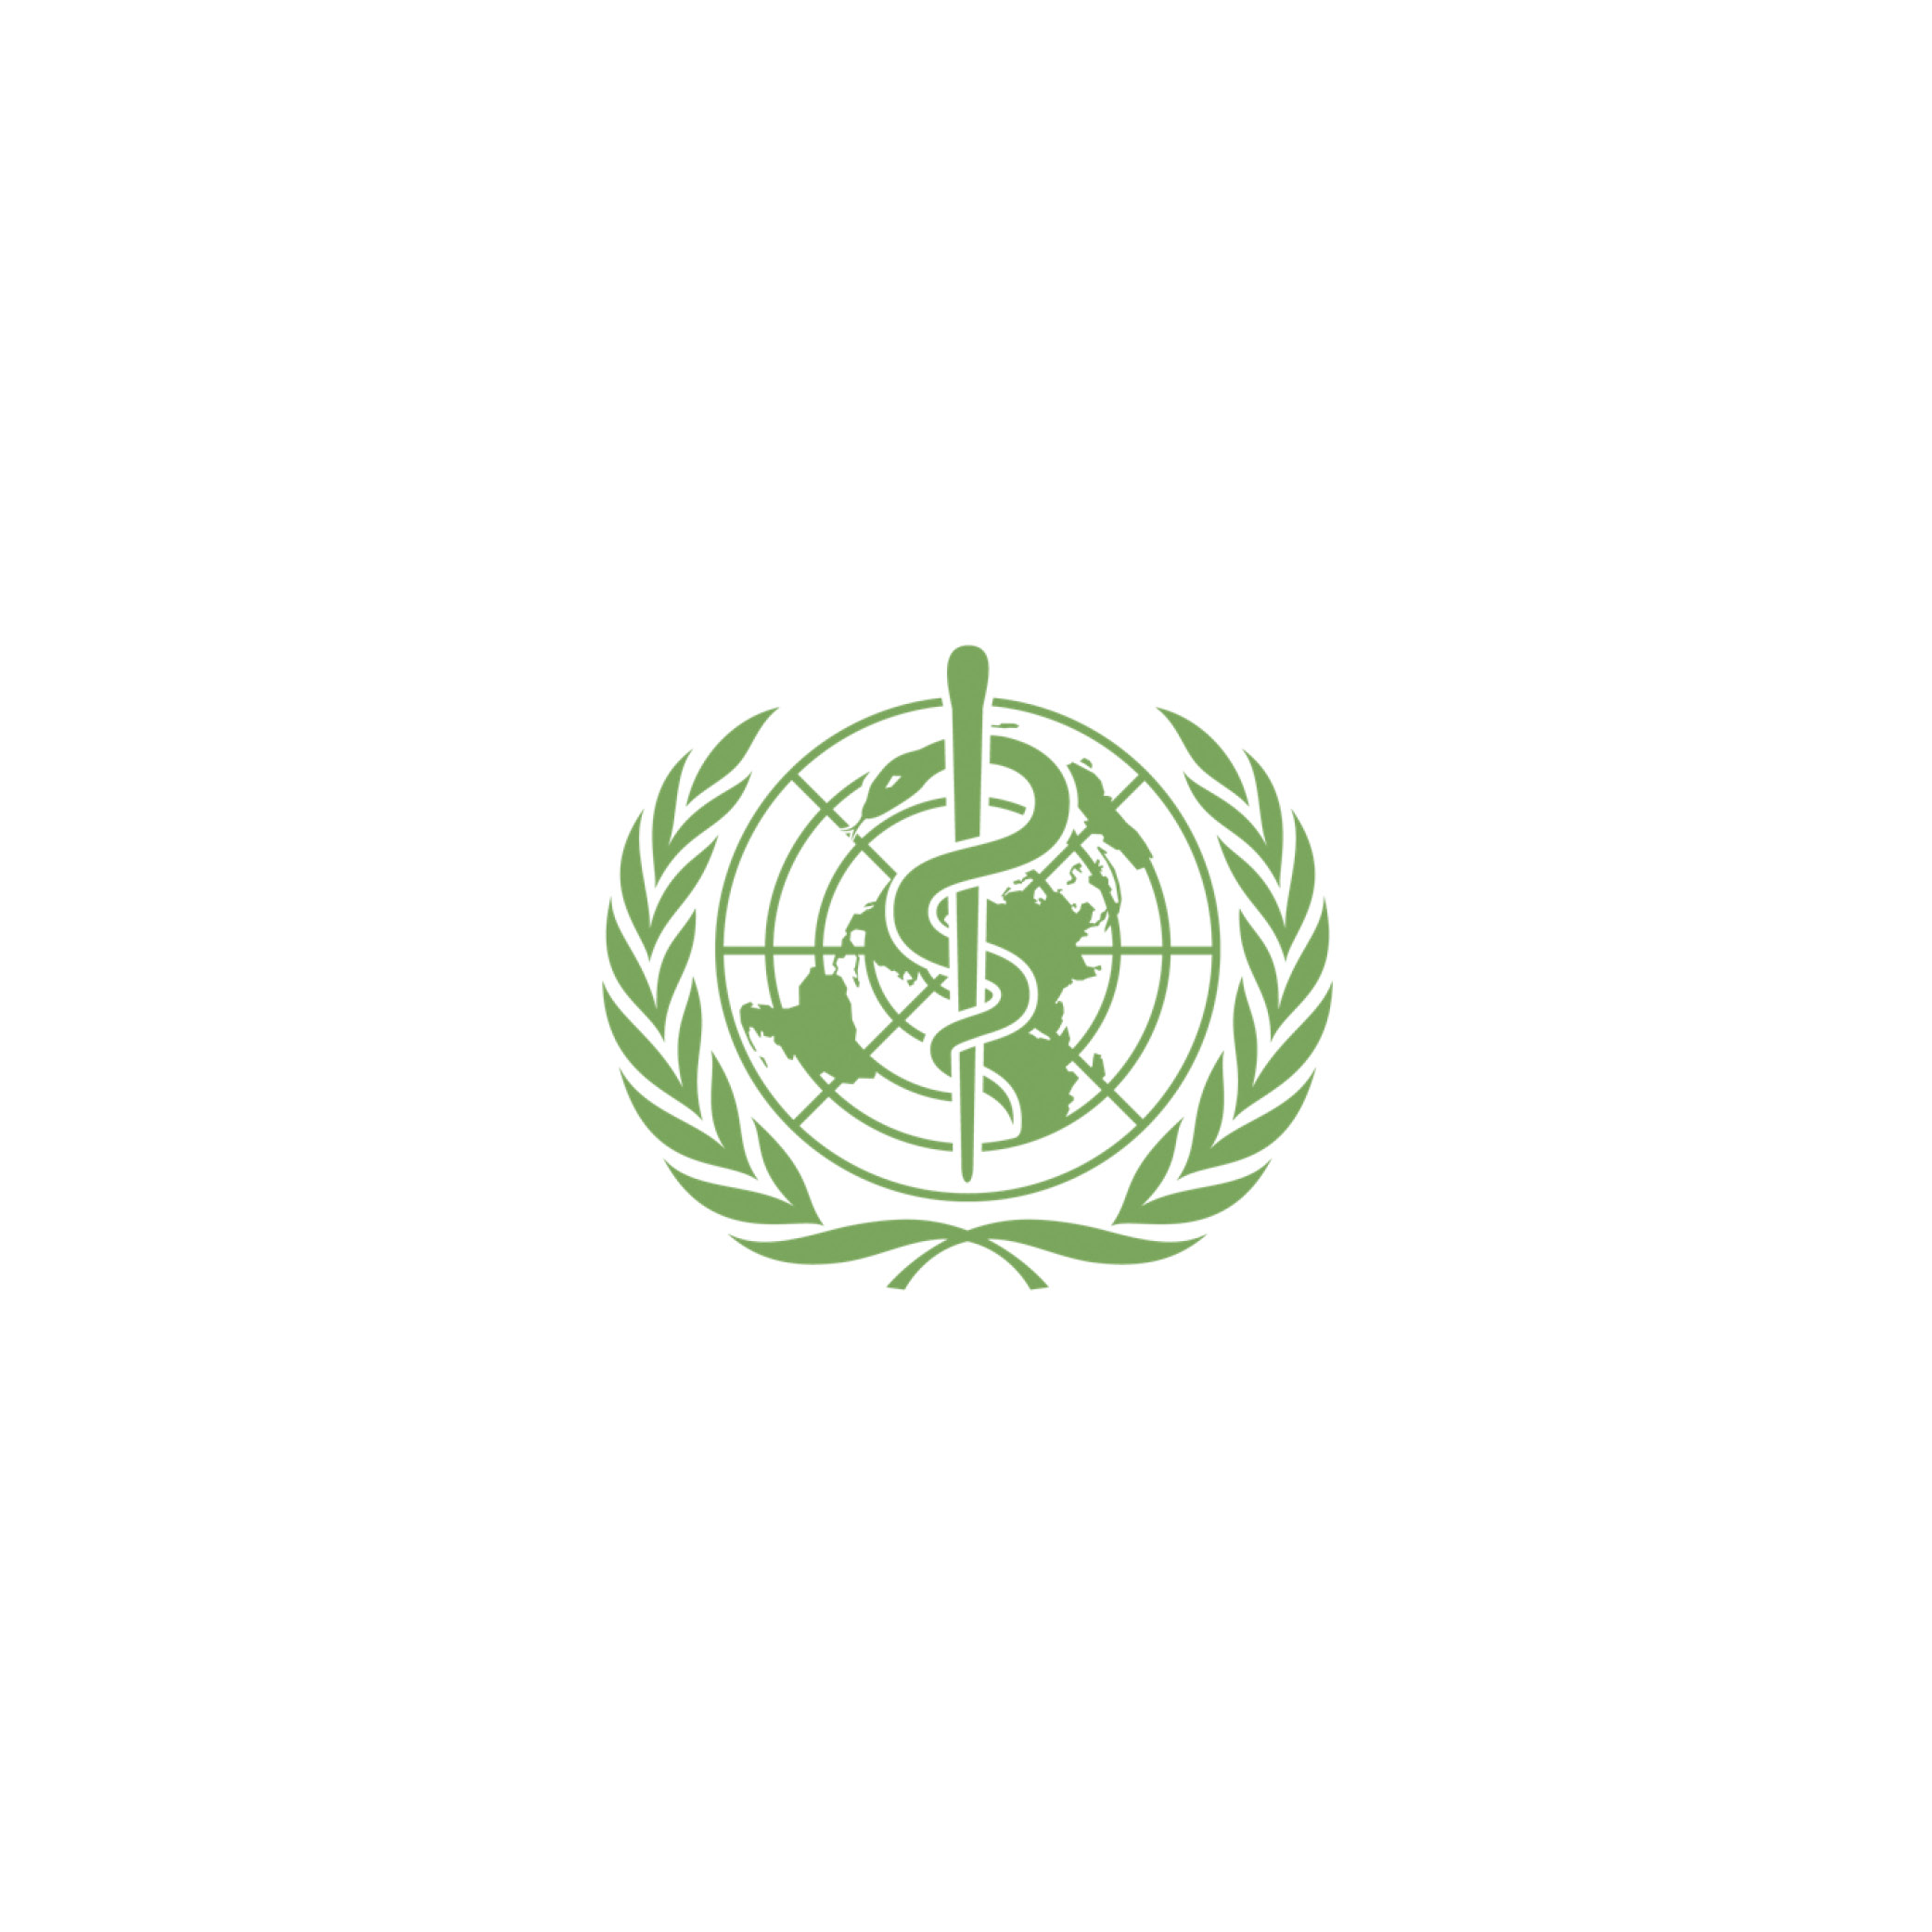 Logo of the Global Health and Development Society